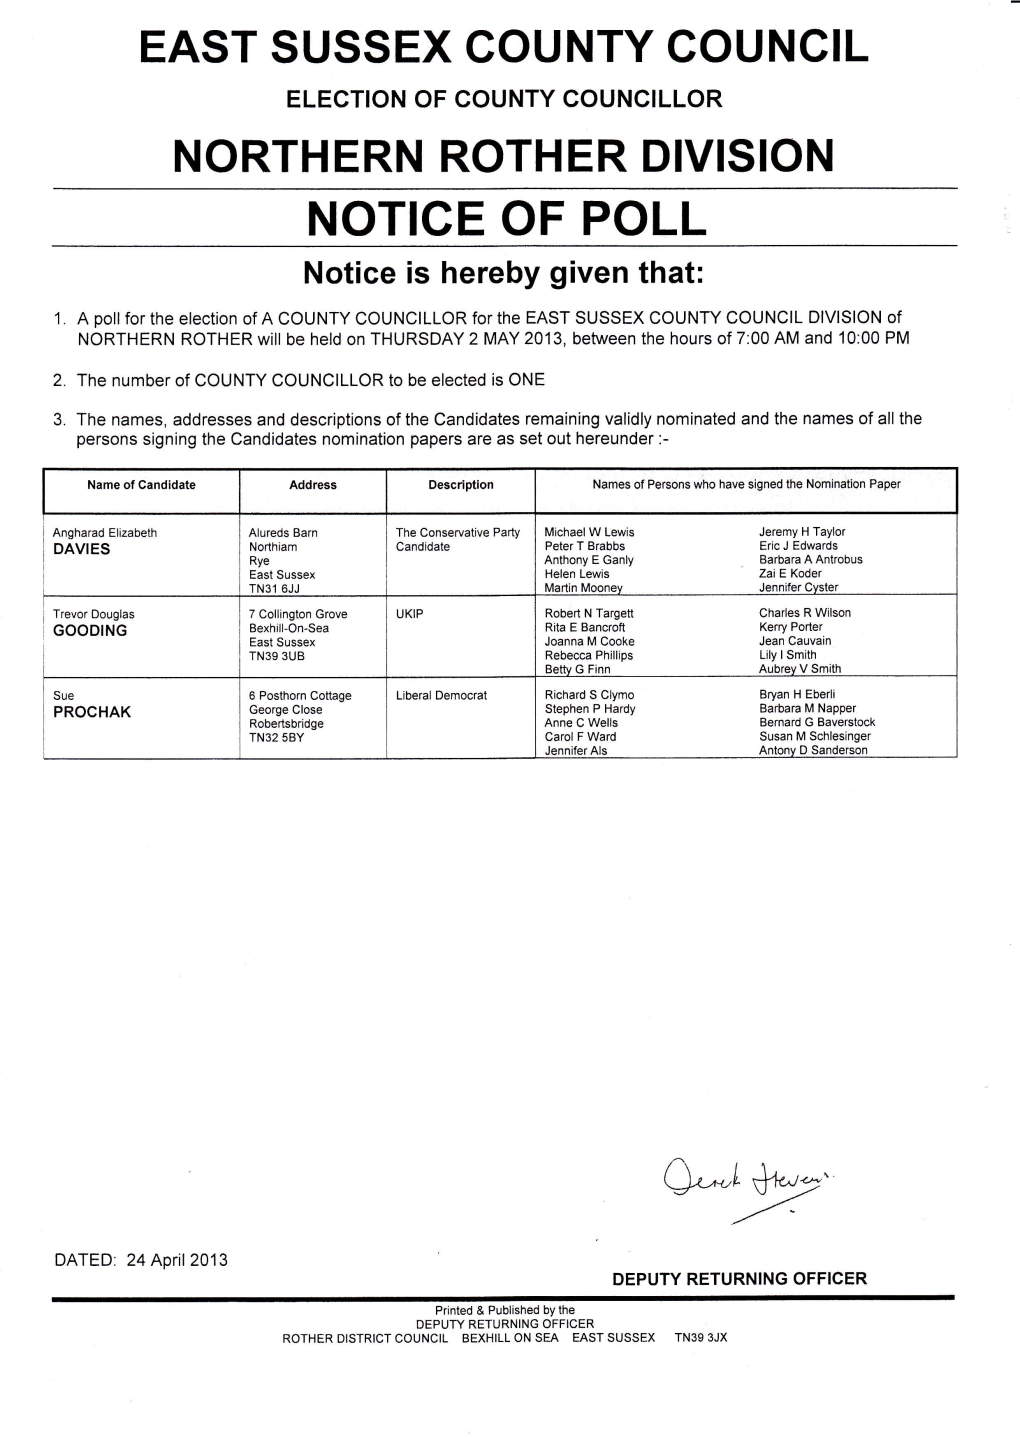 NOTIGE of POLL Notice Is Hereby Given That